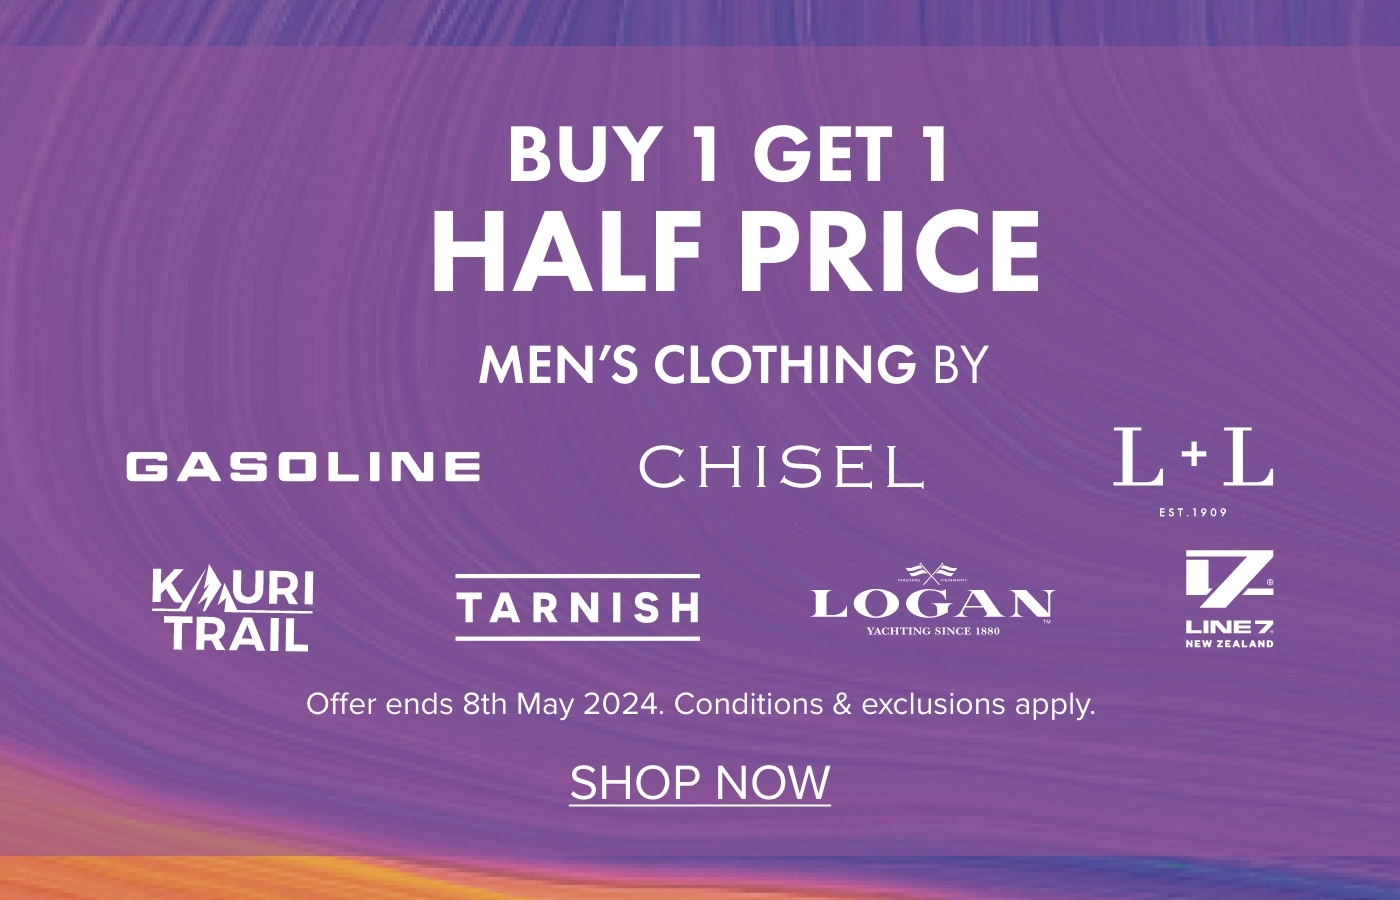 BUY 1 Get 1 HALF PRICE on Men's Clothing by Gasoline, Chisel, L+L Casual, Kauri Trail, Line 7 & Tarnish